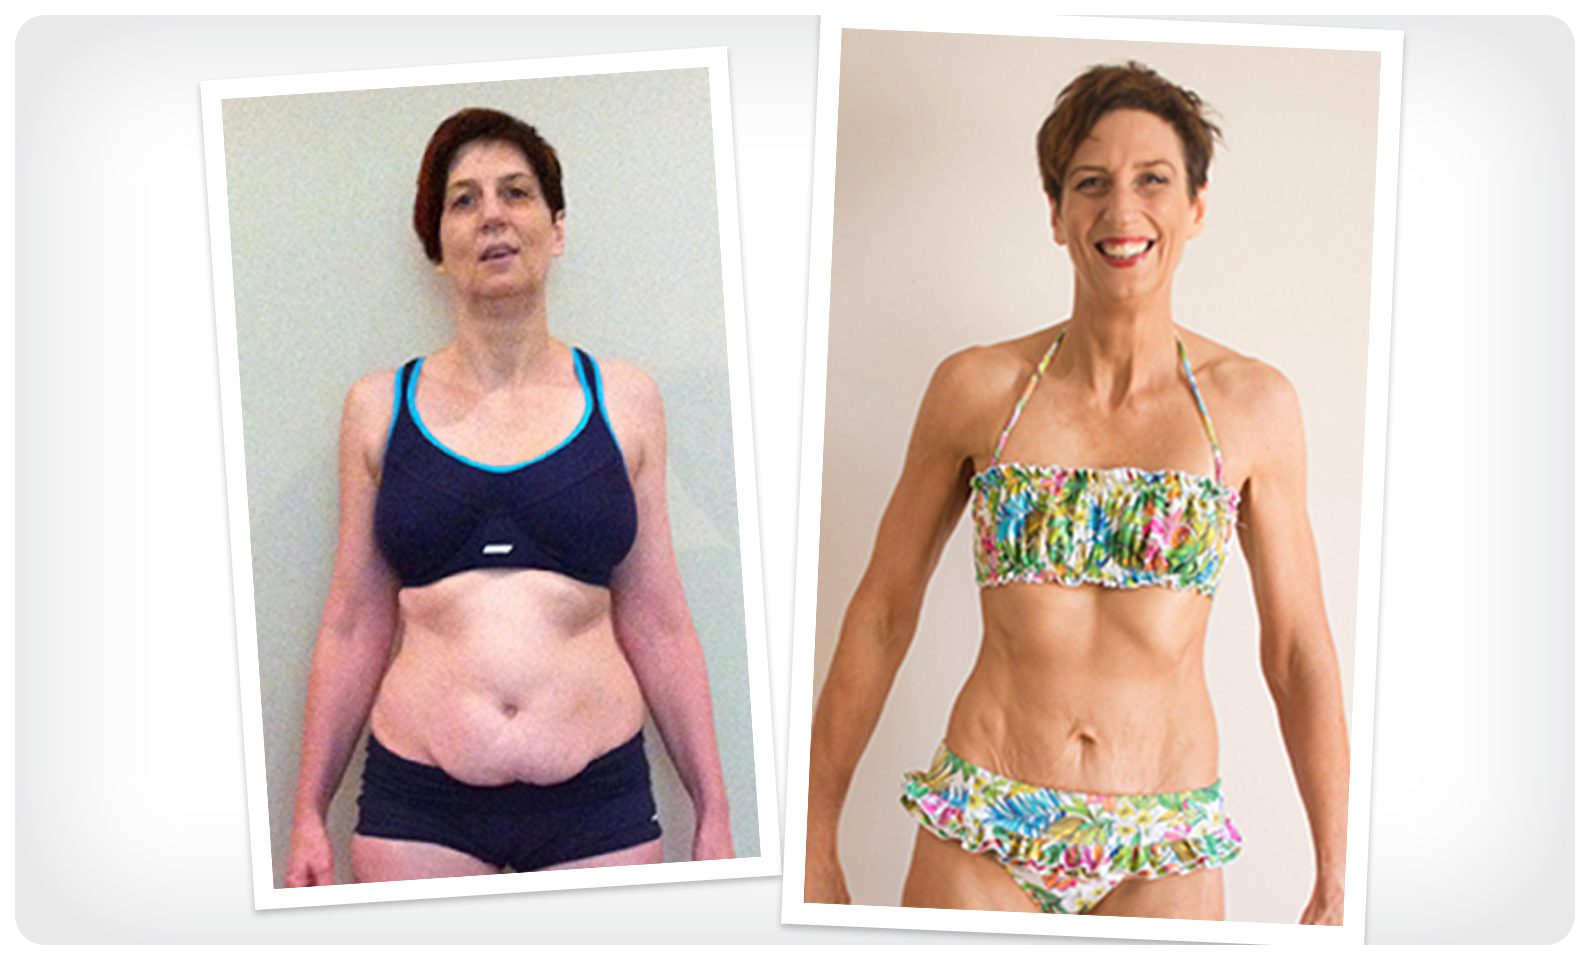 Sharon lost more than 30 pounds with Precision Nutrition Coaching.